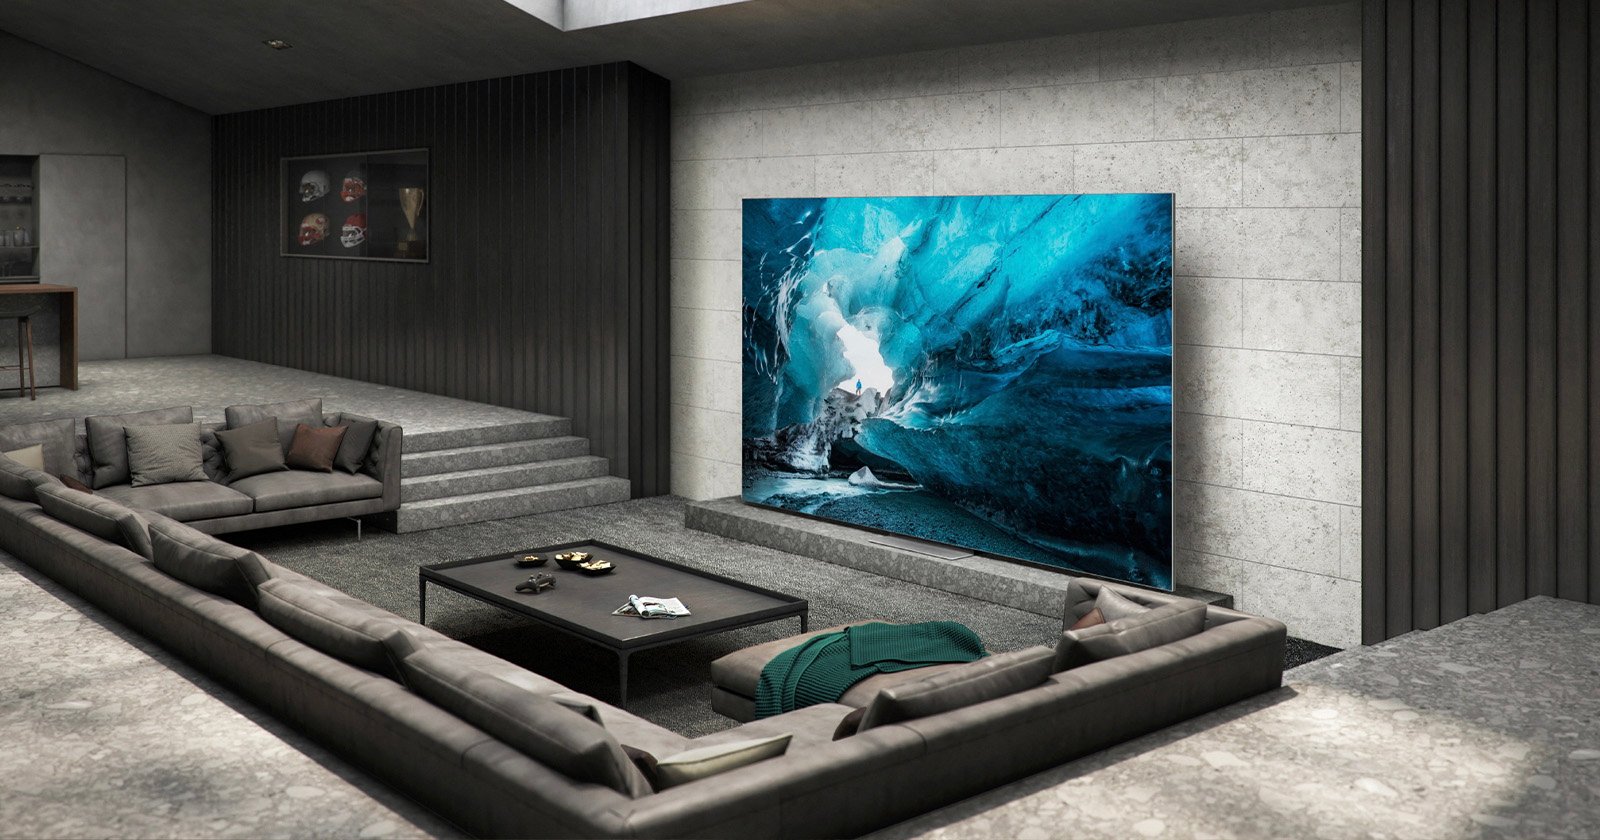 Samsung’s New TVs Let You Invest in, Sell, and Show Images NFTs